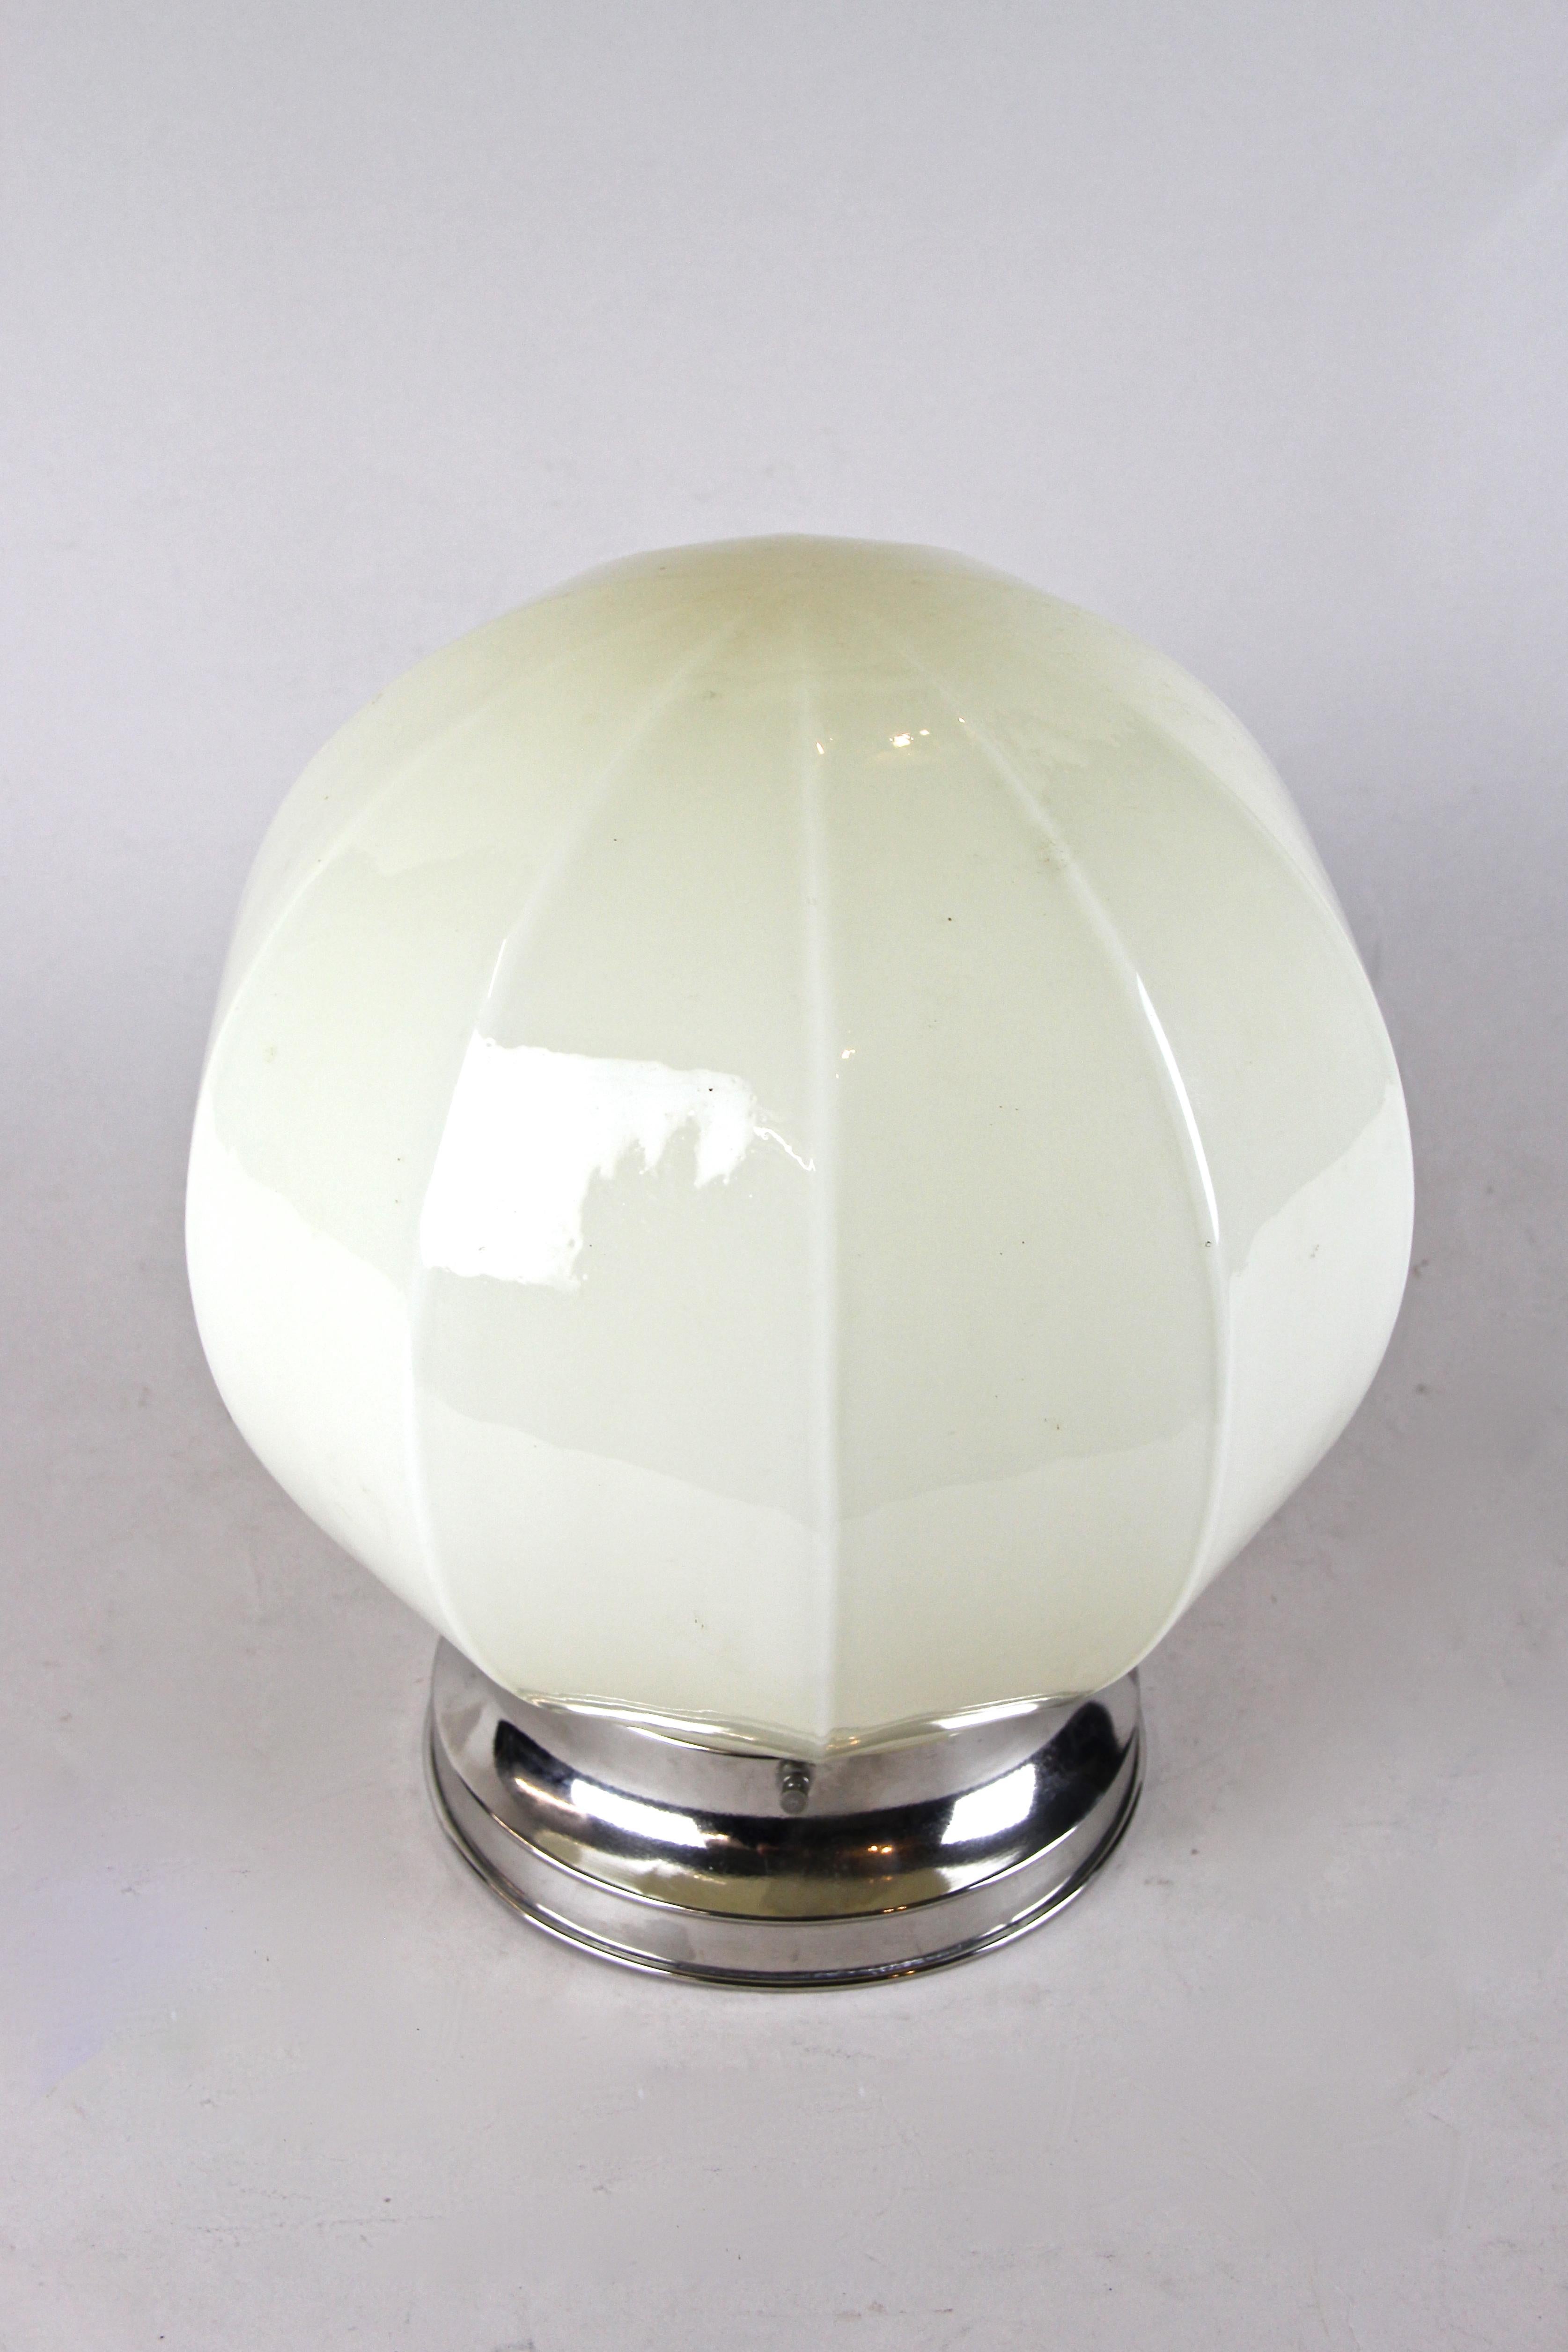 Decorative Art Deco flush mount lightning from the period circa 1930 in Austria.
A nice designed glass ball sits on a chromed metal base and gives this timeless piece of lightning a very own and luxury touch.